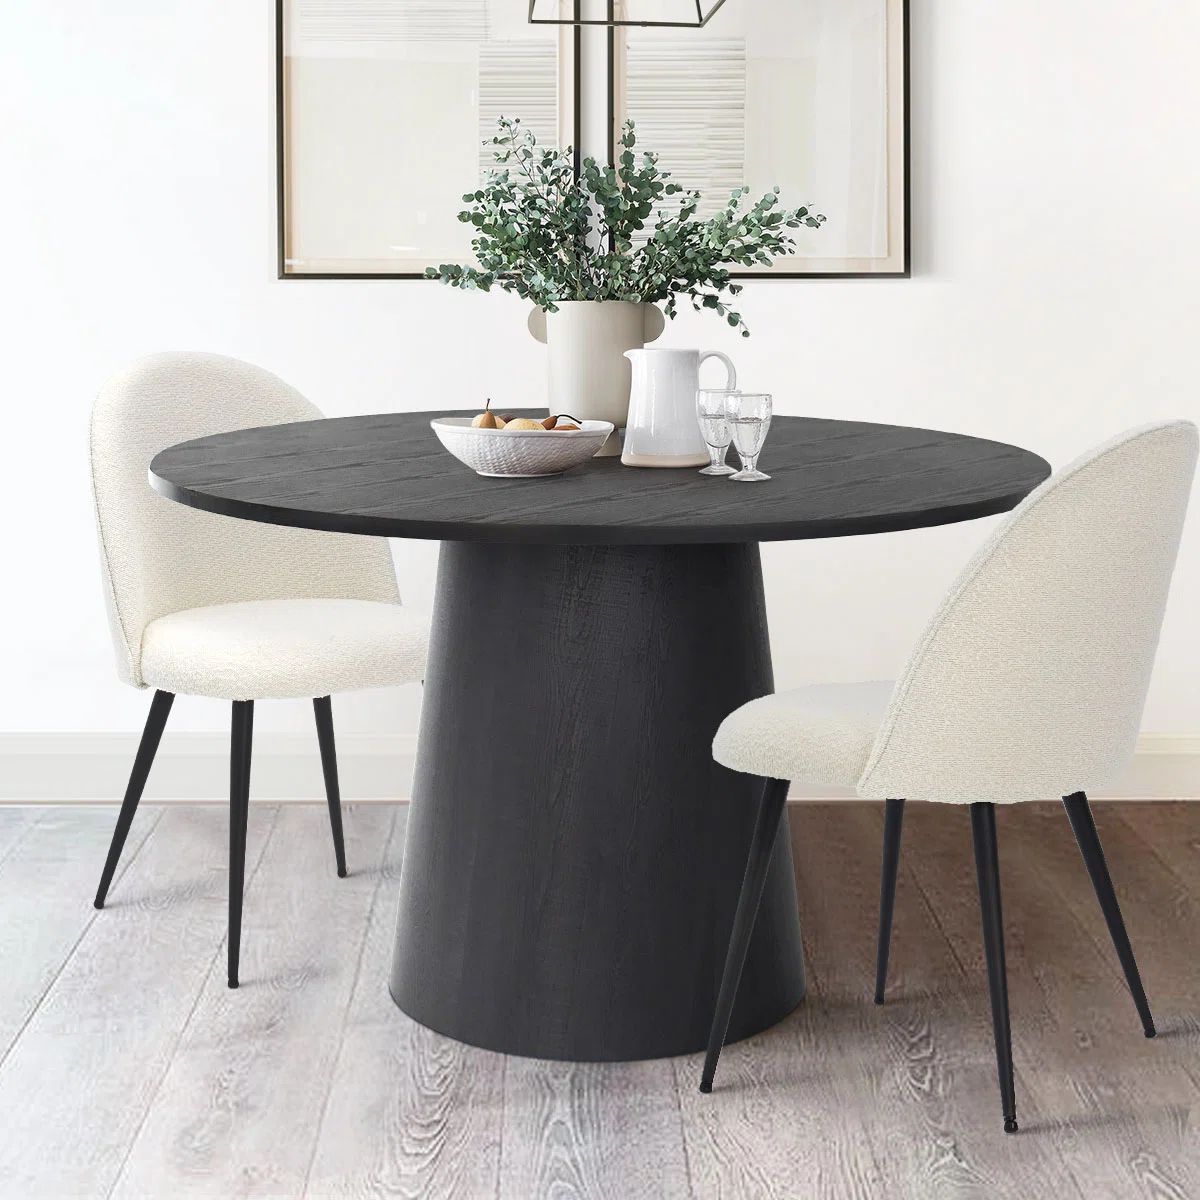 DWEN-CONE 46" Fixed Pedestal Dining TableSee More by Latitude Run®Rated 4.3 out of 5 stars.4.345... | Wayfair North America